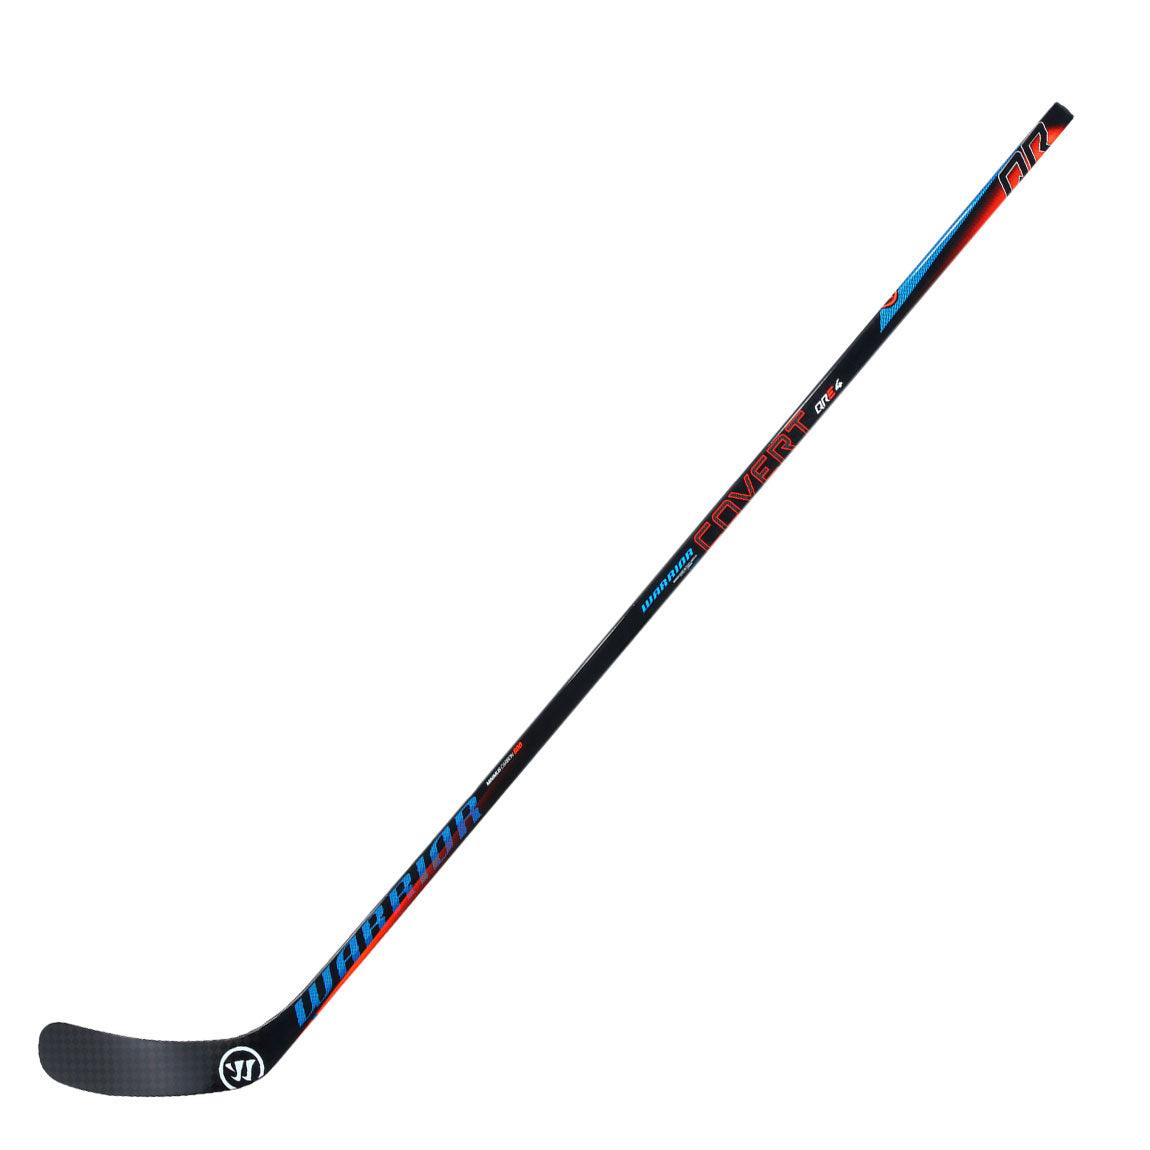 Covert QRE 4 Hockey Stick - Intermediate - Sports Excellence